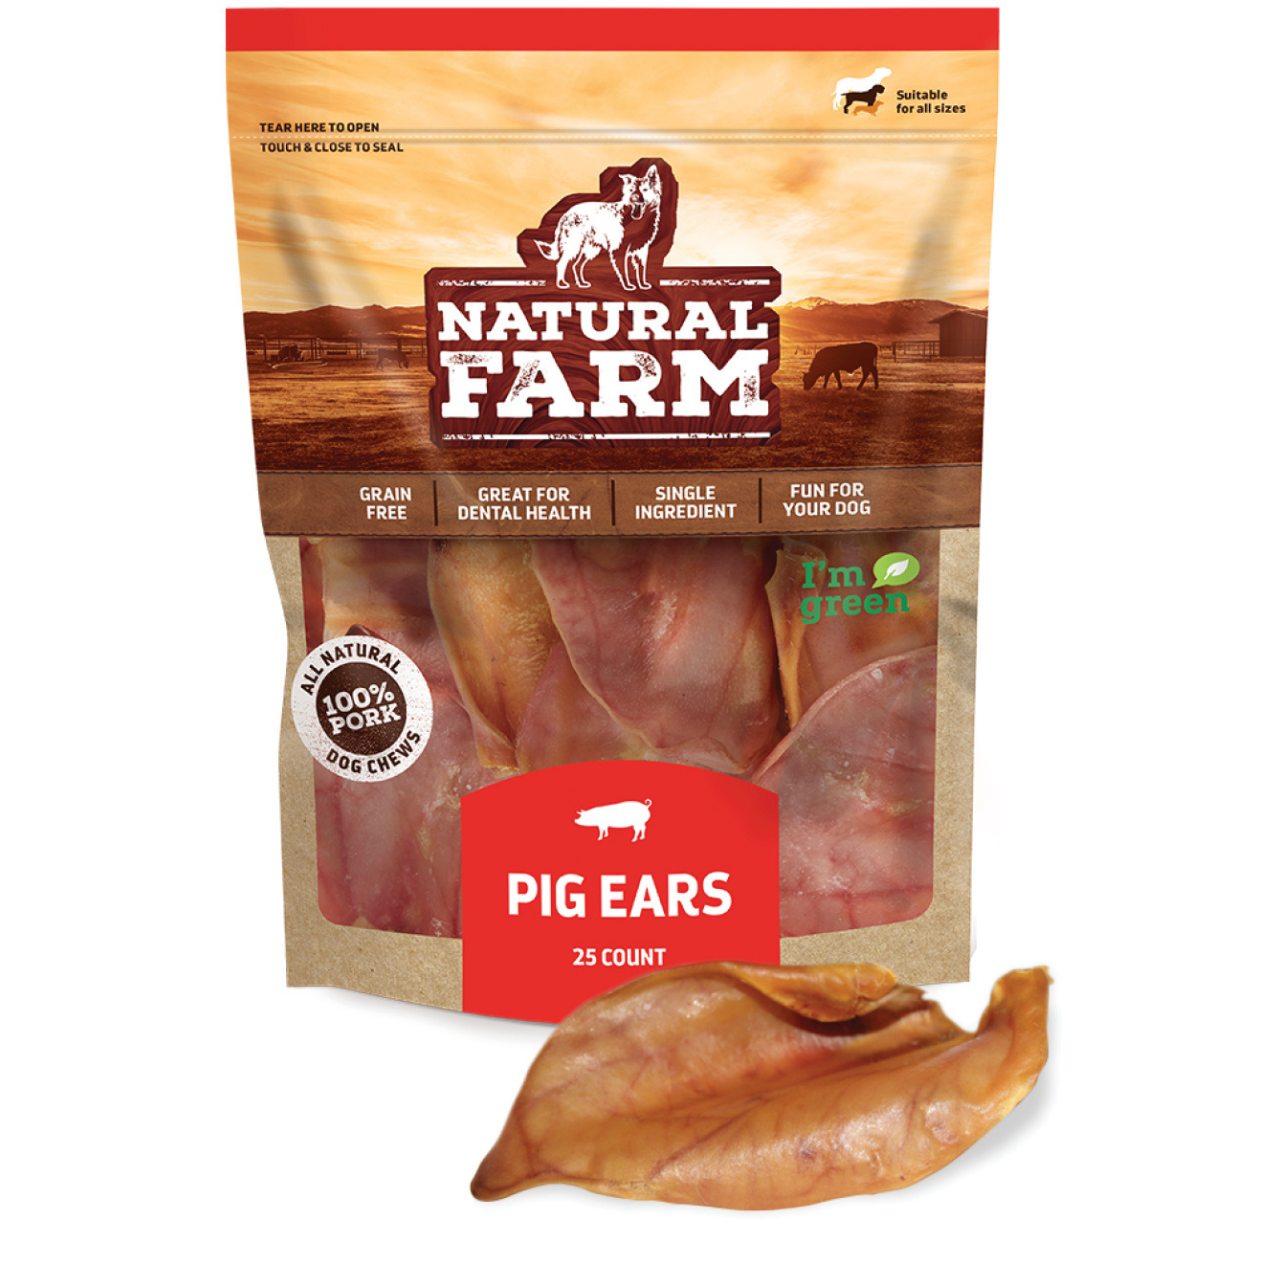 are pig ears better for a dalmatian than rawhide ears